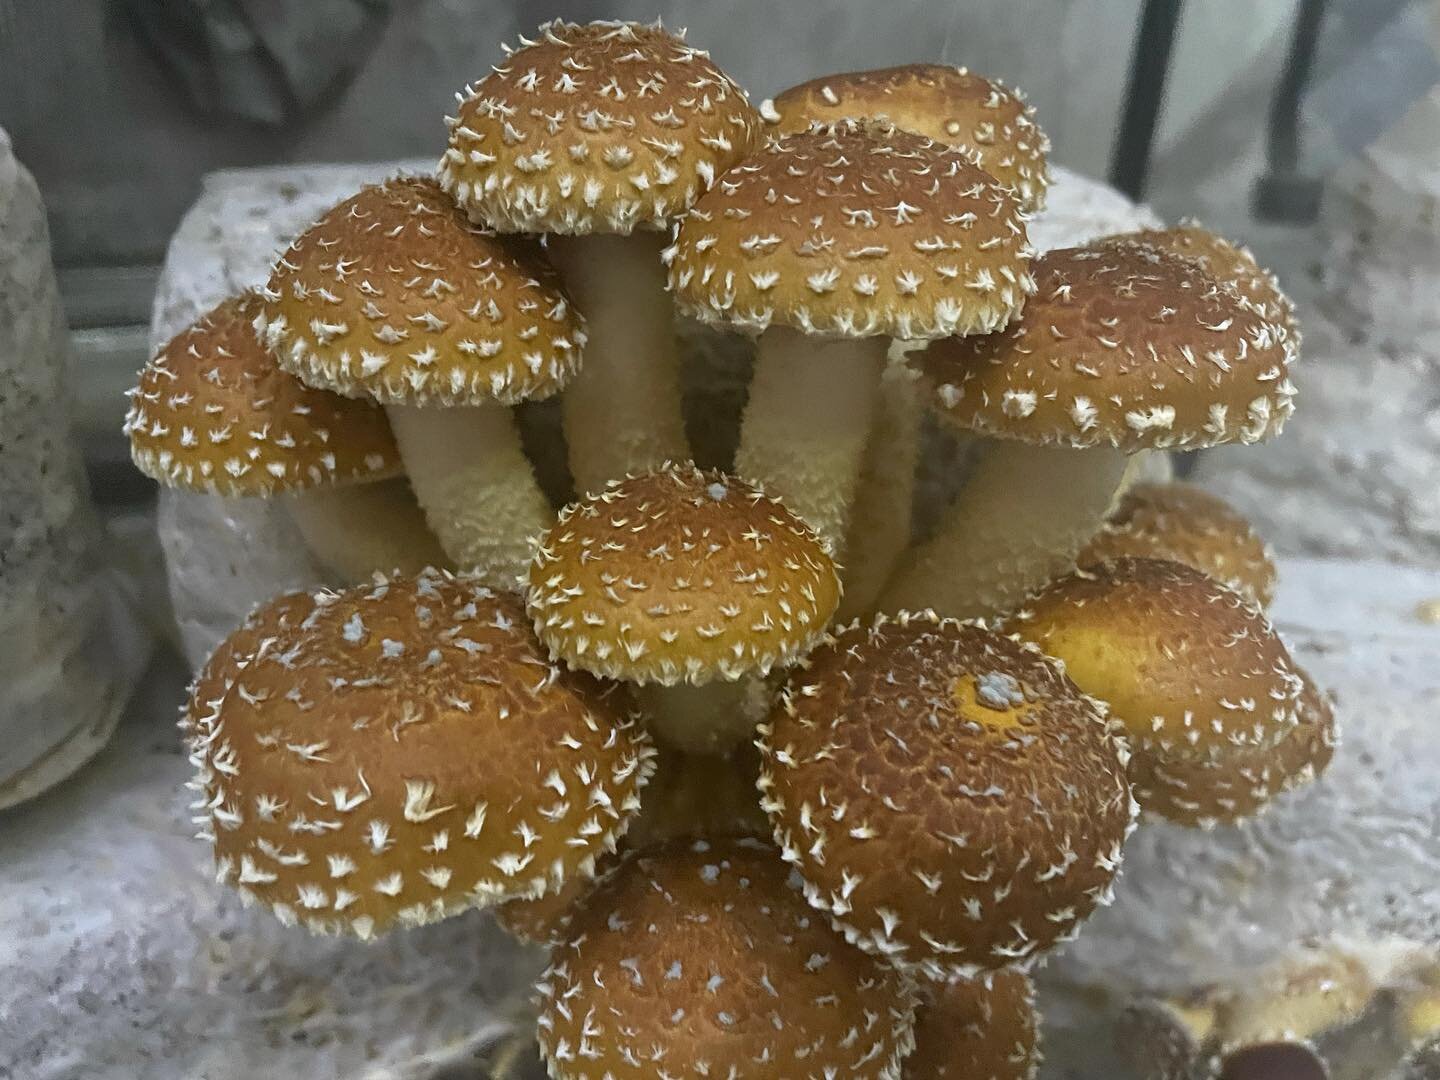 Added Chestnut mushrooms to the line-up!